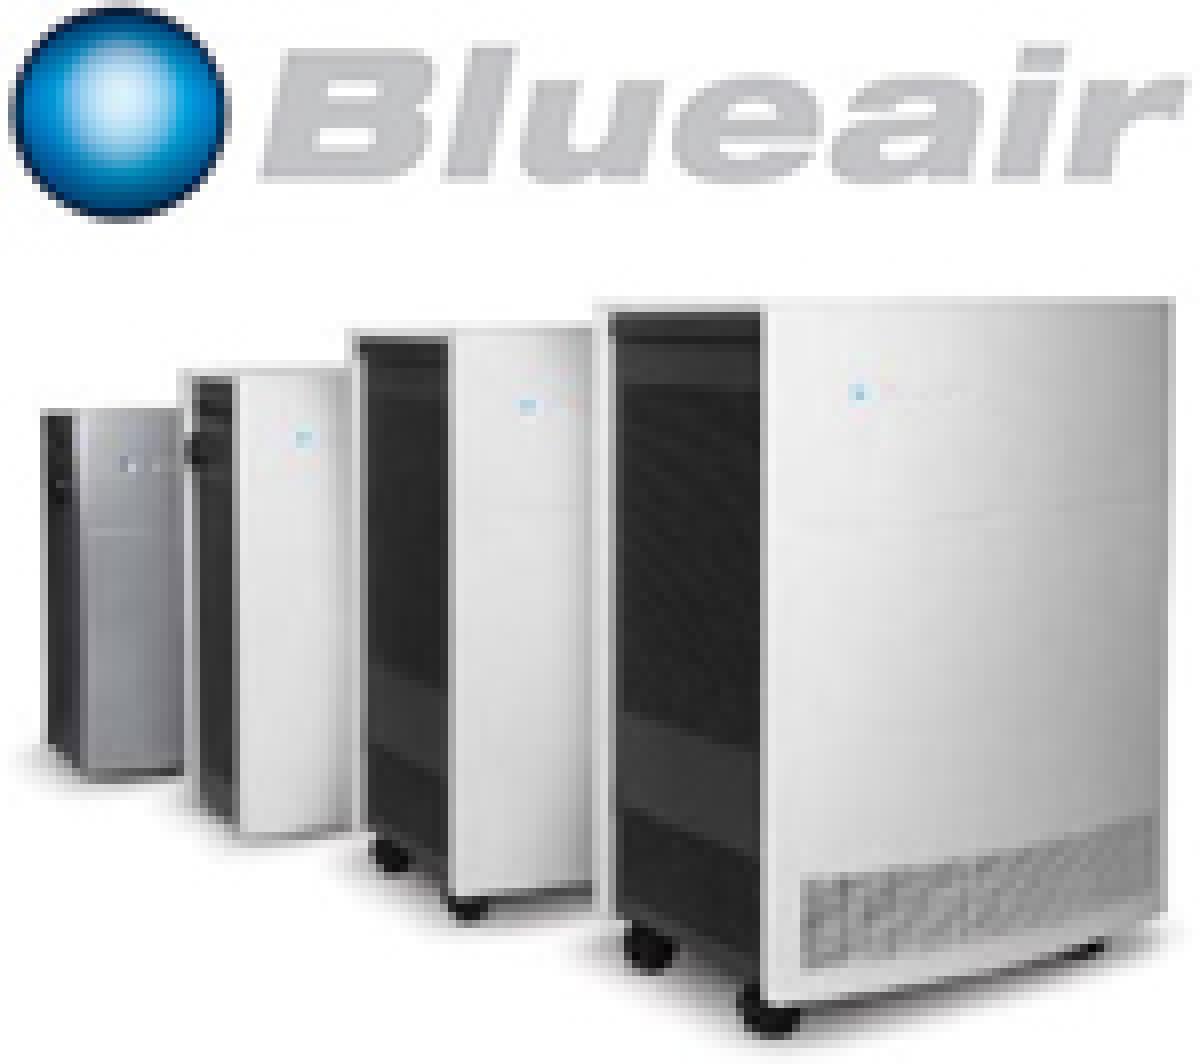 Breathe Purified Air all Year Long with Blueair’s Diwali Offer